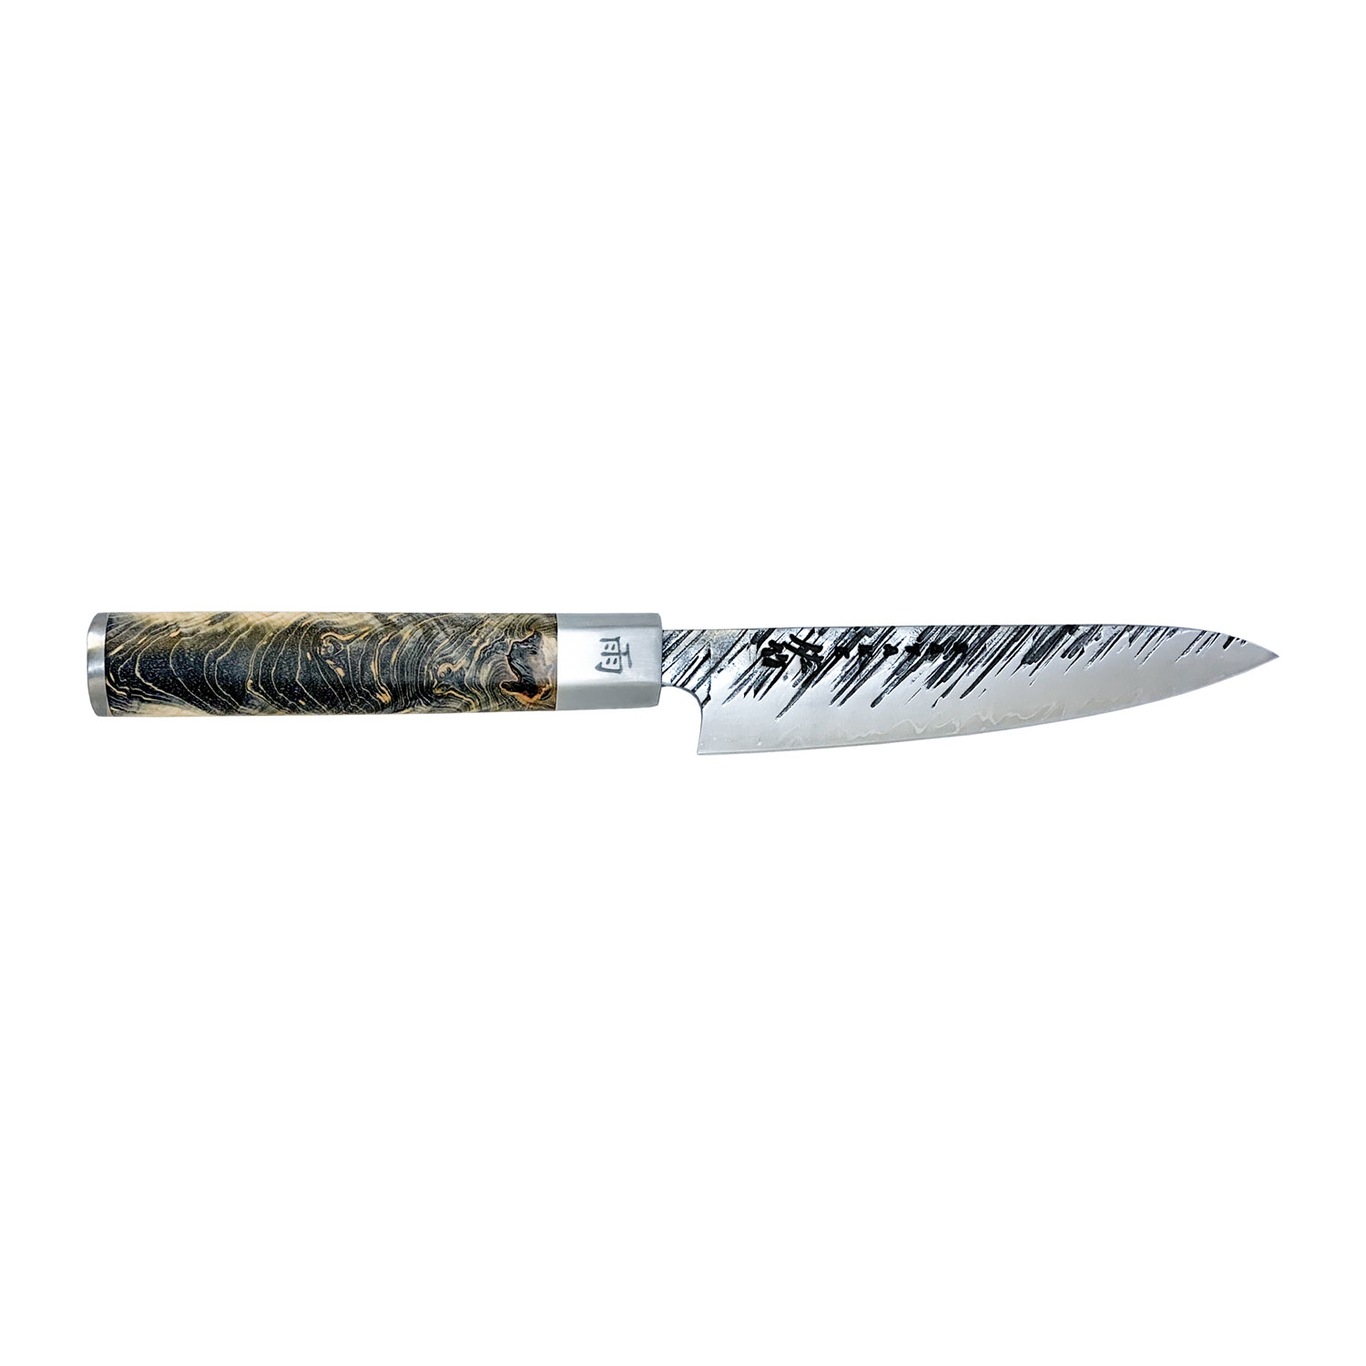 Ame Petty Paring Knife 12 cm